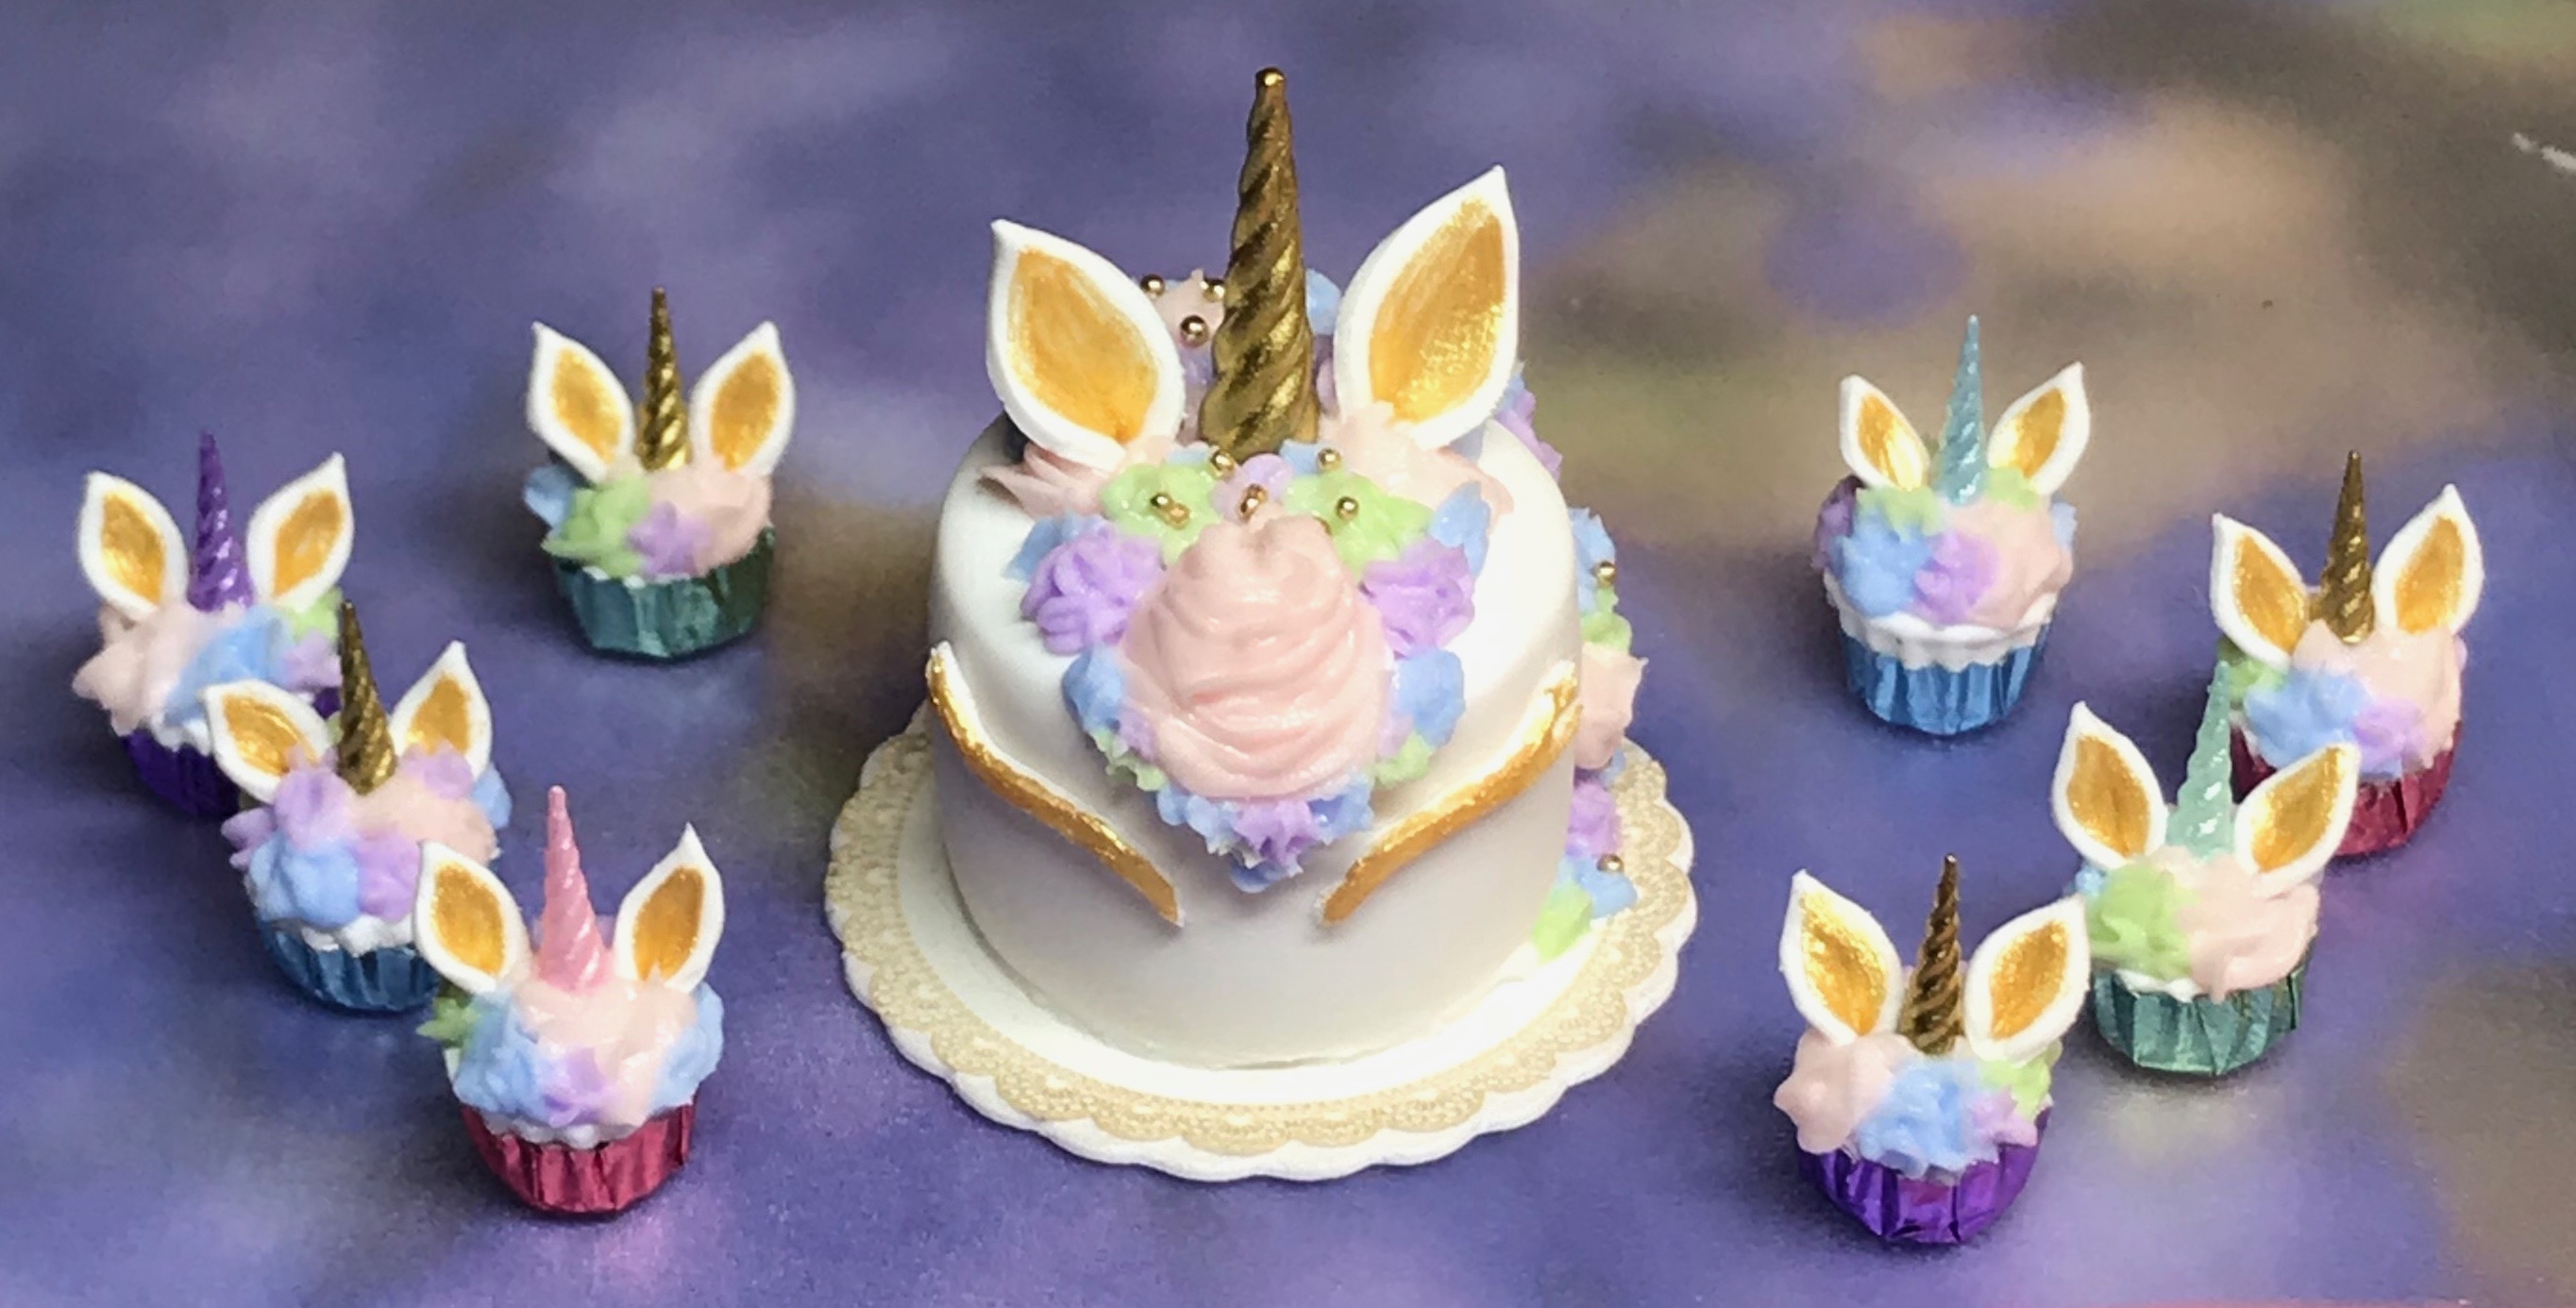 Fantasy Rainbow Unicorn Cake - A Delicious Treat for Any Occasion - Best  Custom Birthday Cakes in NYC - Delivery Available